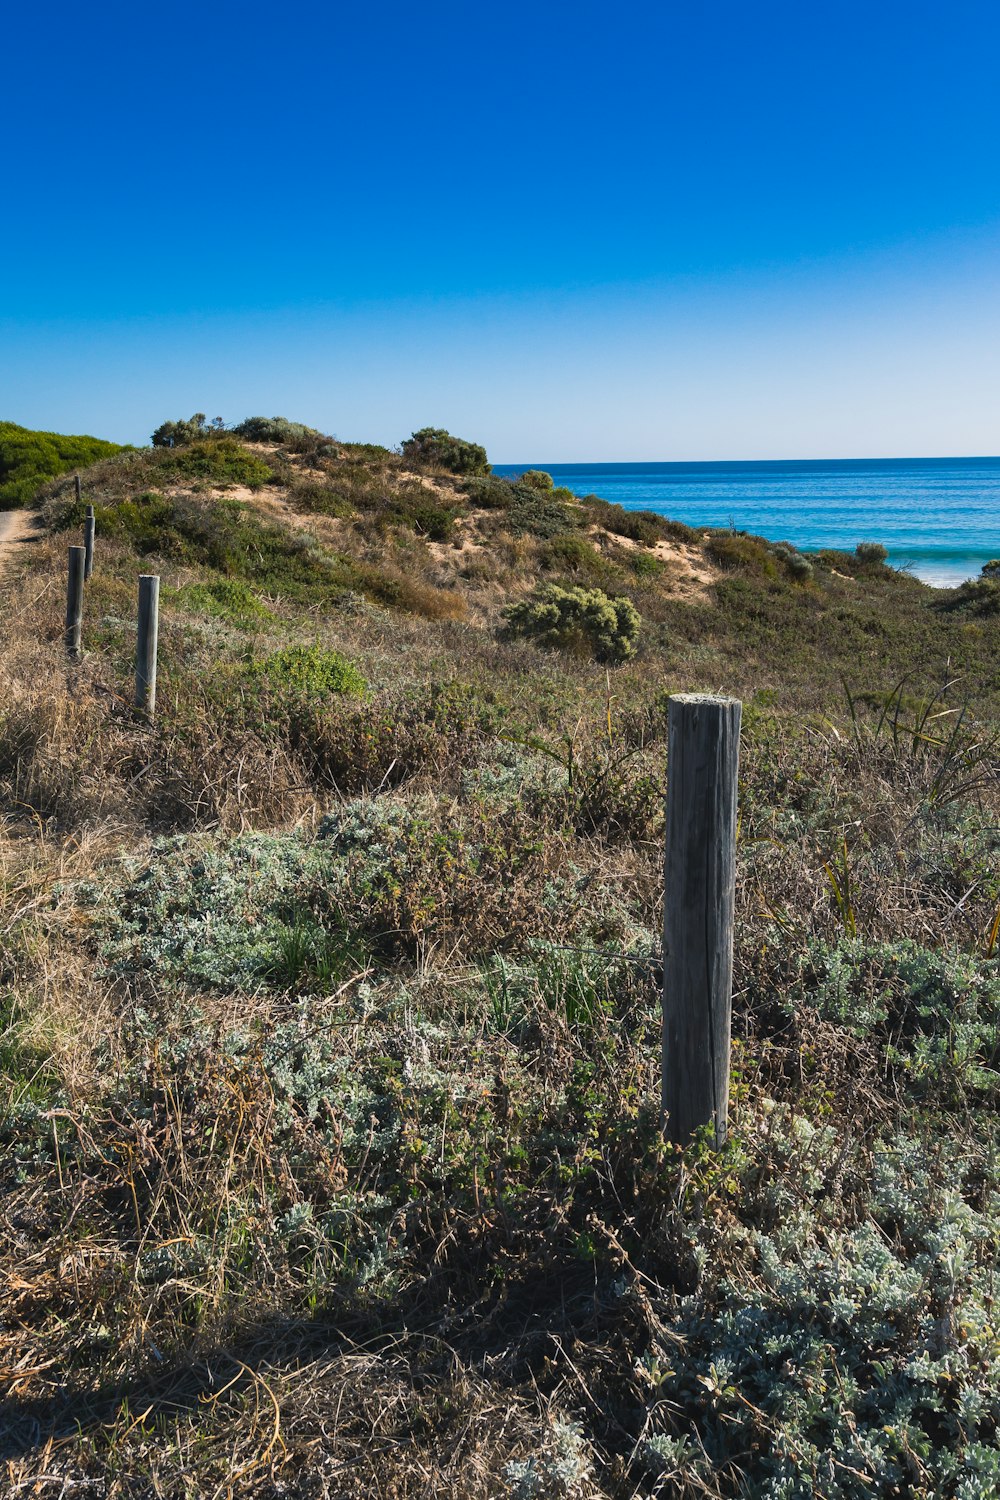 a wooden post in a grassy field next to the ocean